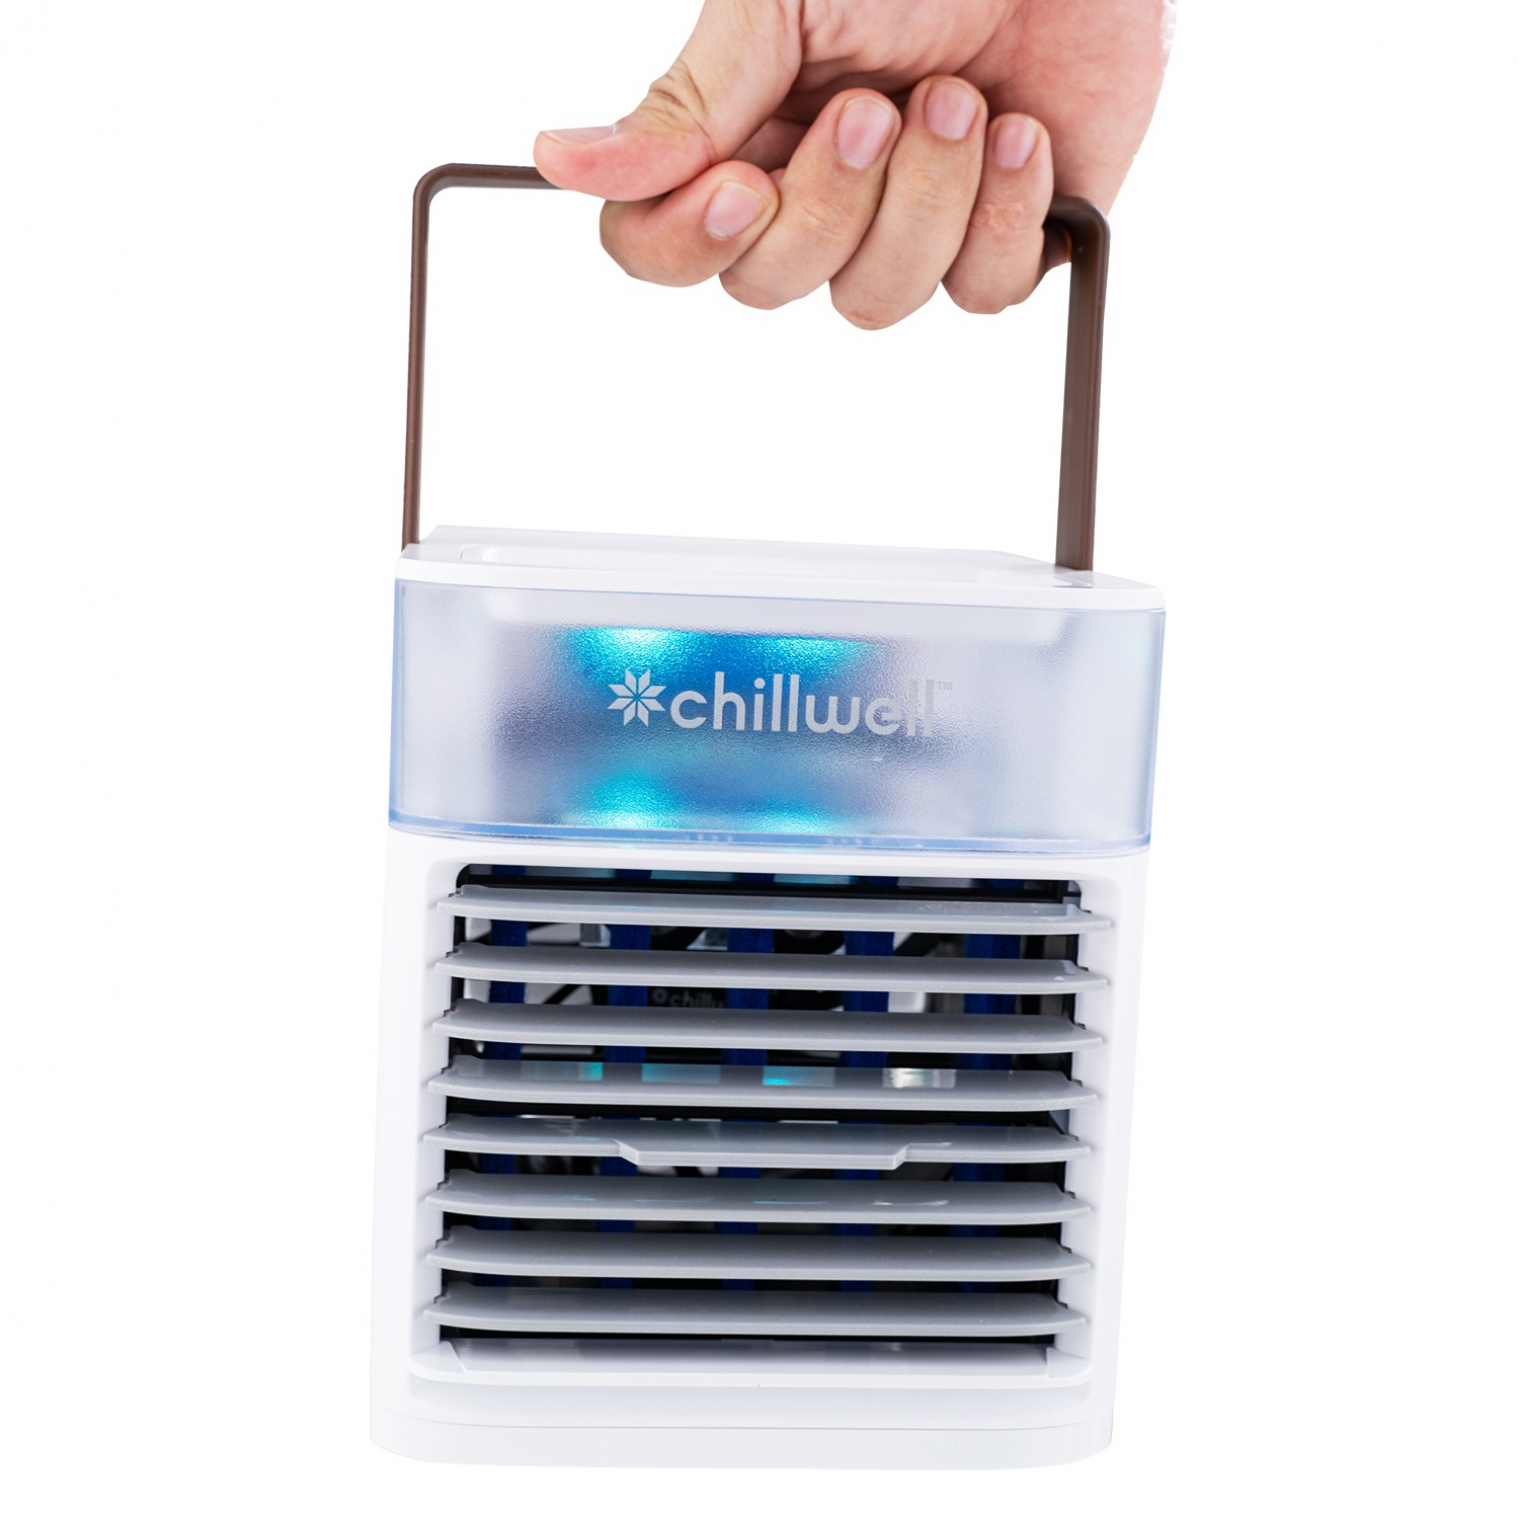 Chillwell AC Cooler Tower